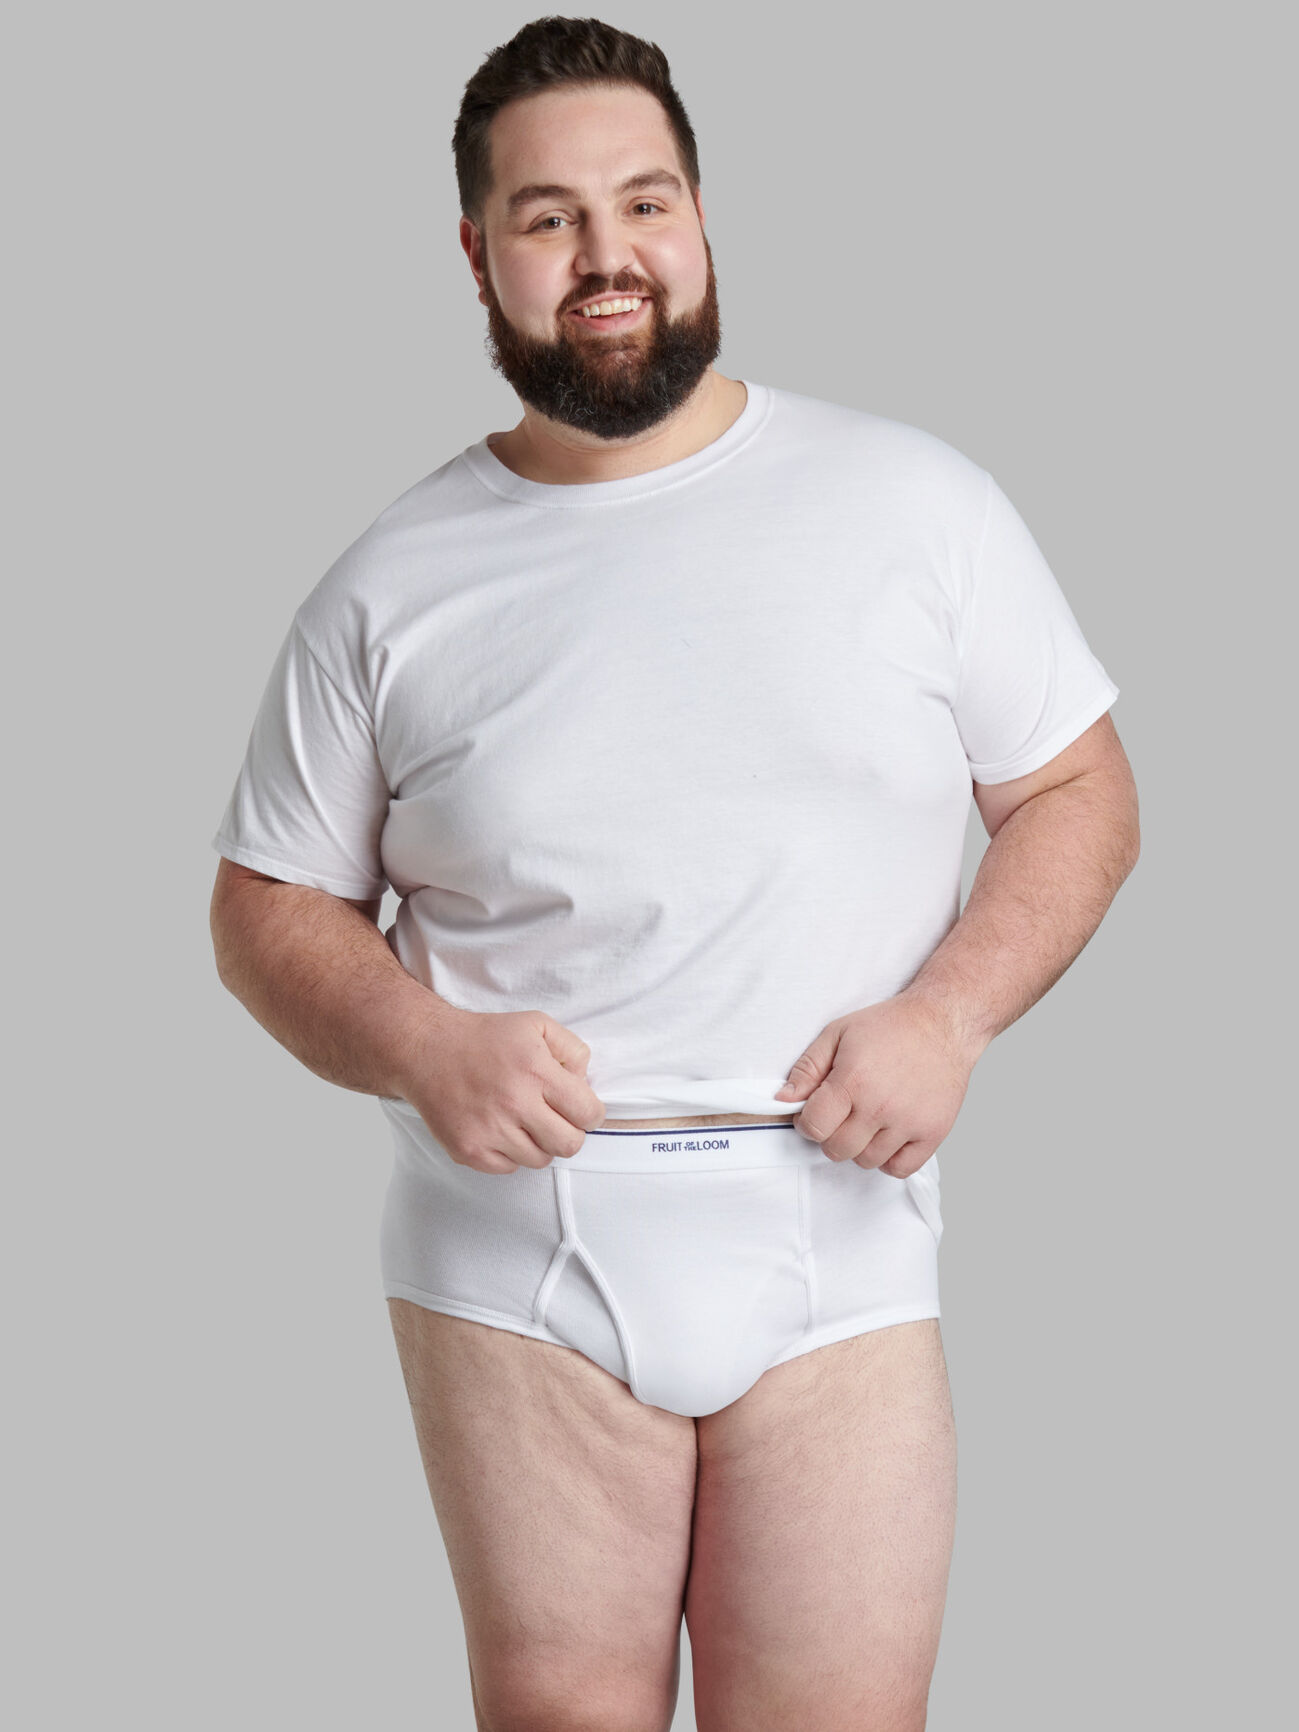 Men's Big and Tall Thermal Underwear Sets – Big and Tall for Men